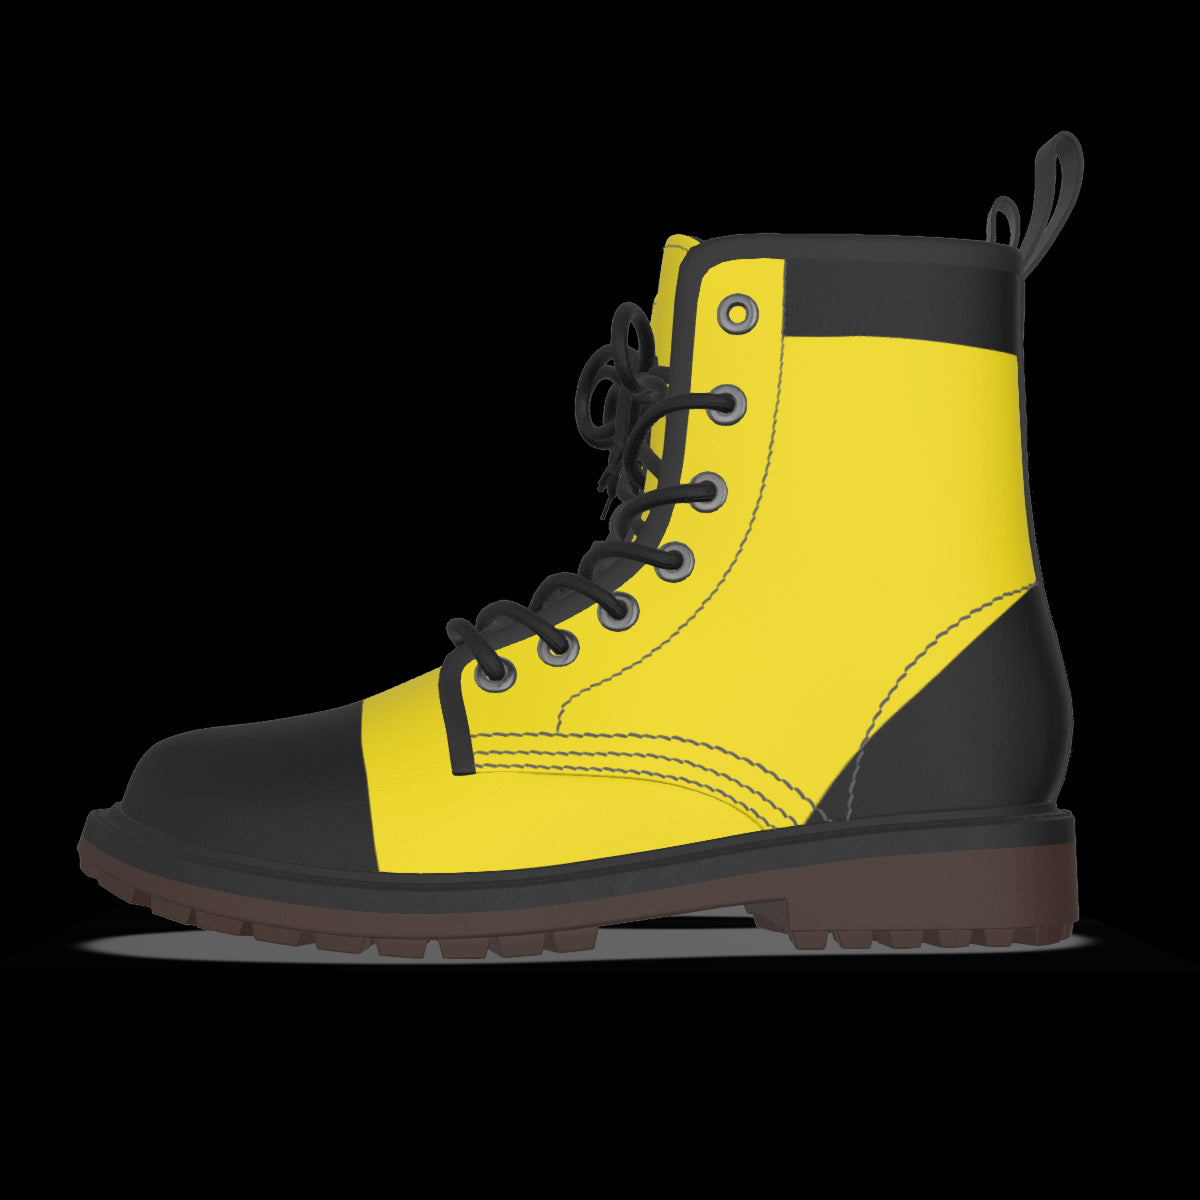 Titus Yellow Boots